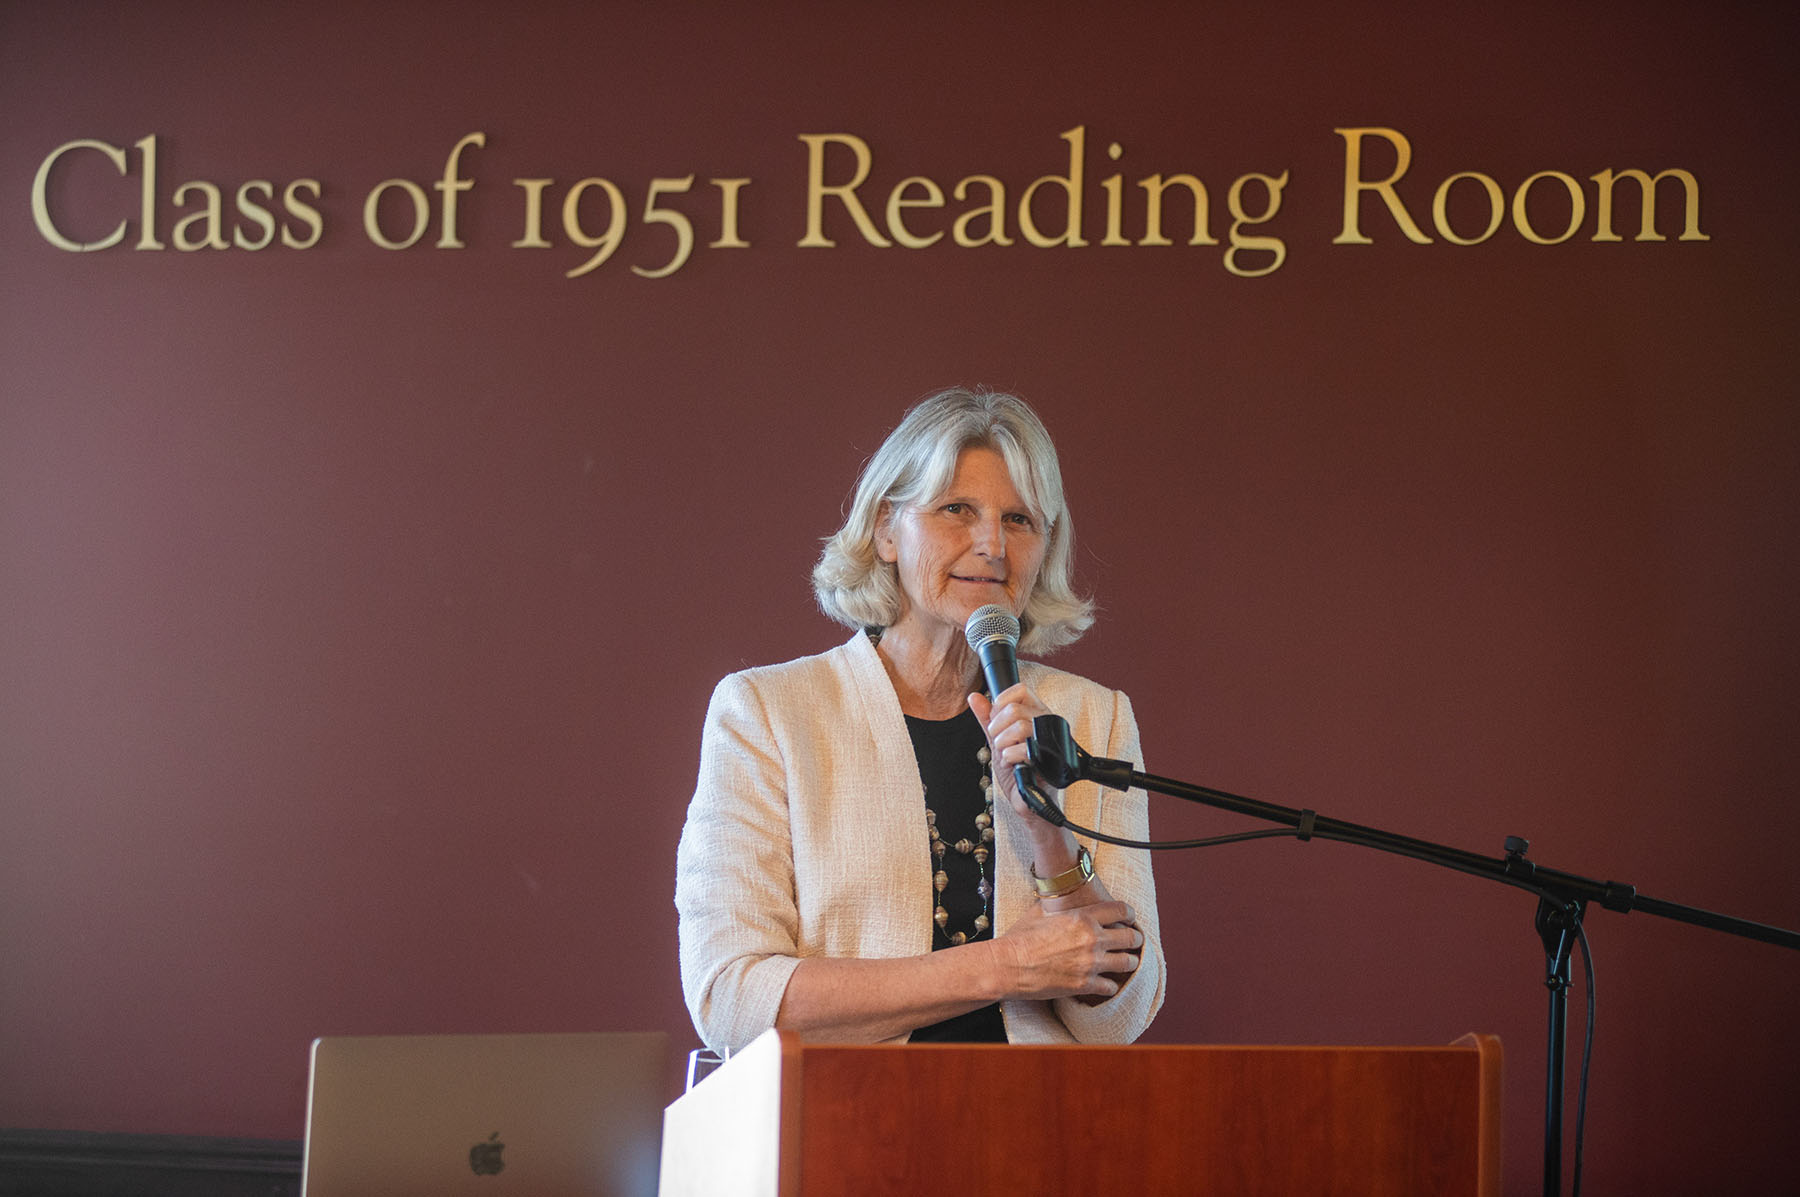 President Elizabeth H. Bradley, wearing a black shirt and white jacket, speaking at podium in front of 1941 reading room sign.